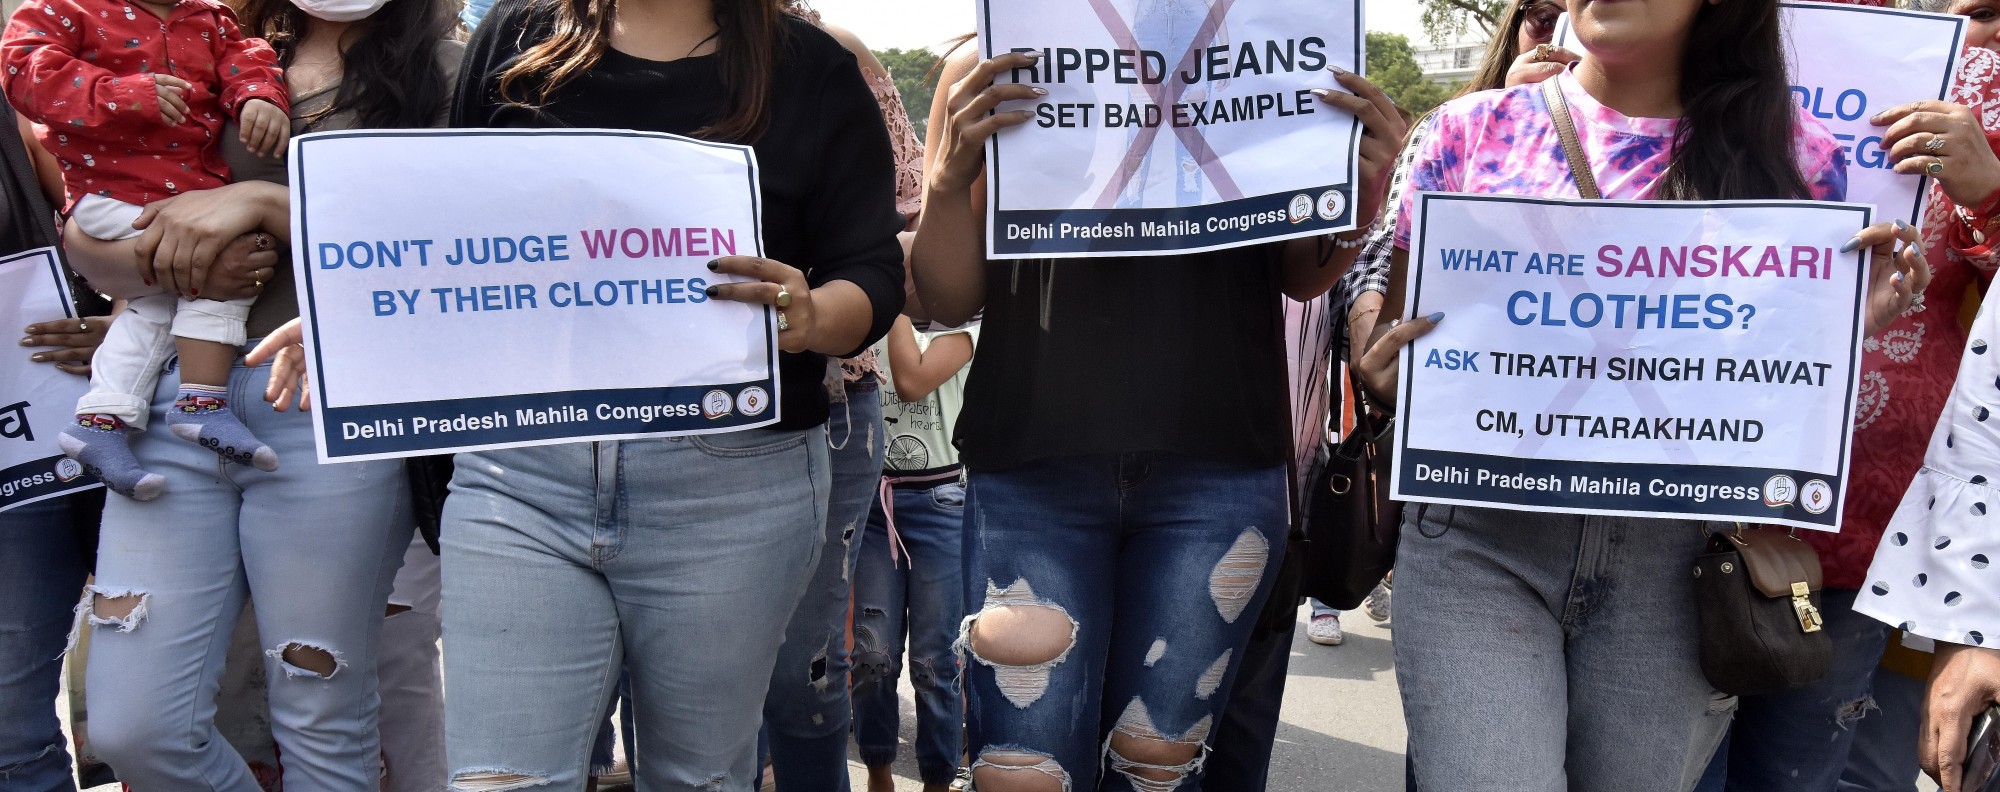 School Girl With Out Dress Video Live - In India, wearing jeans can be liberating â€“ or deadly â€“ for women | South  China Morning Post